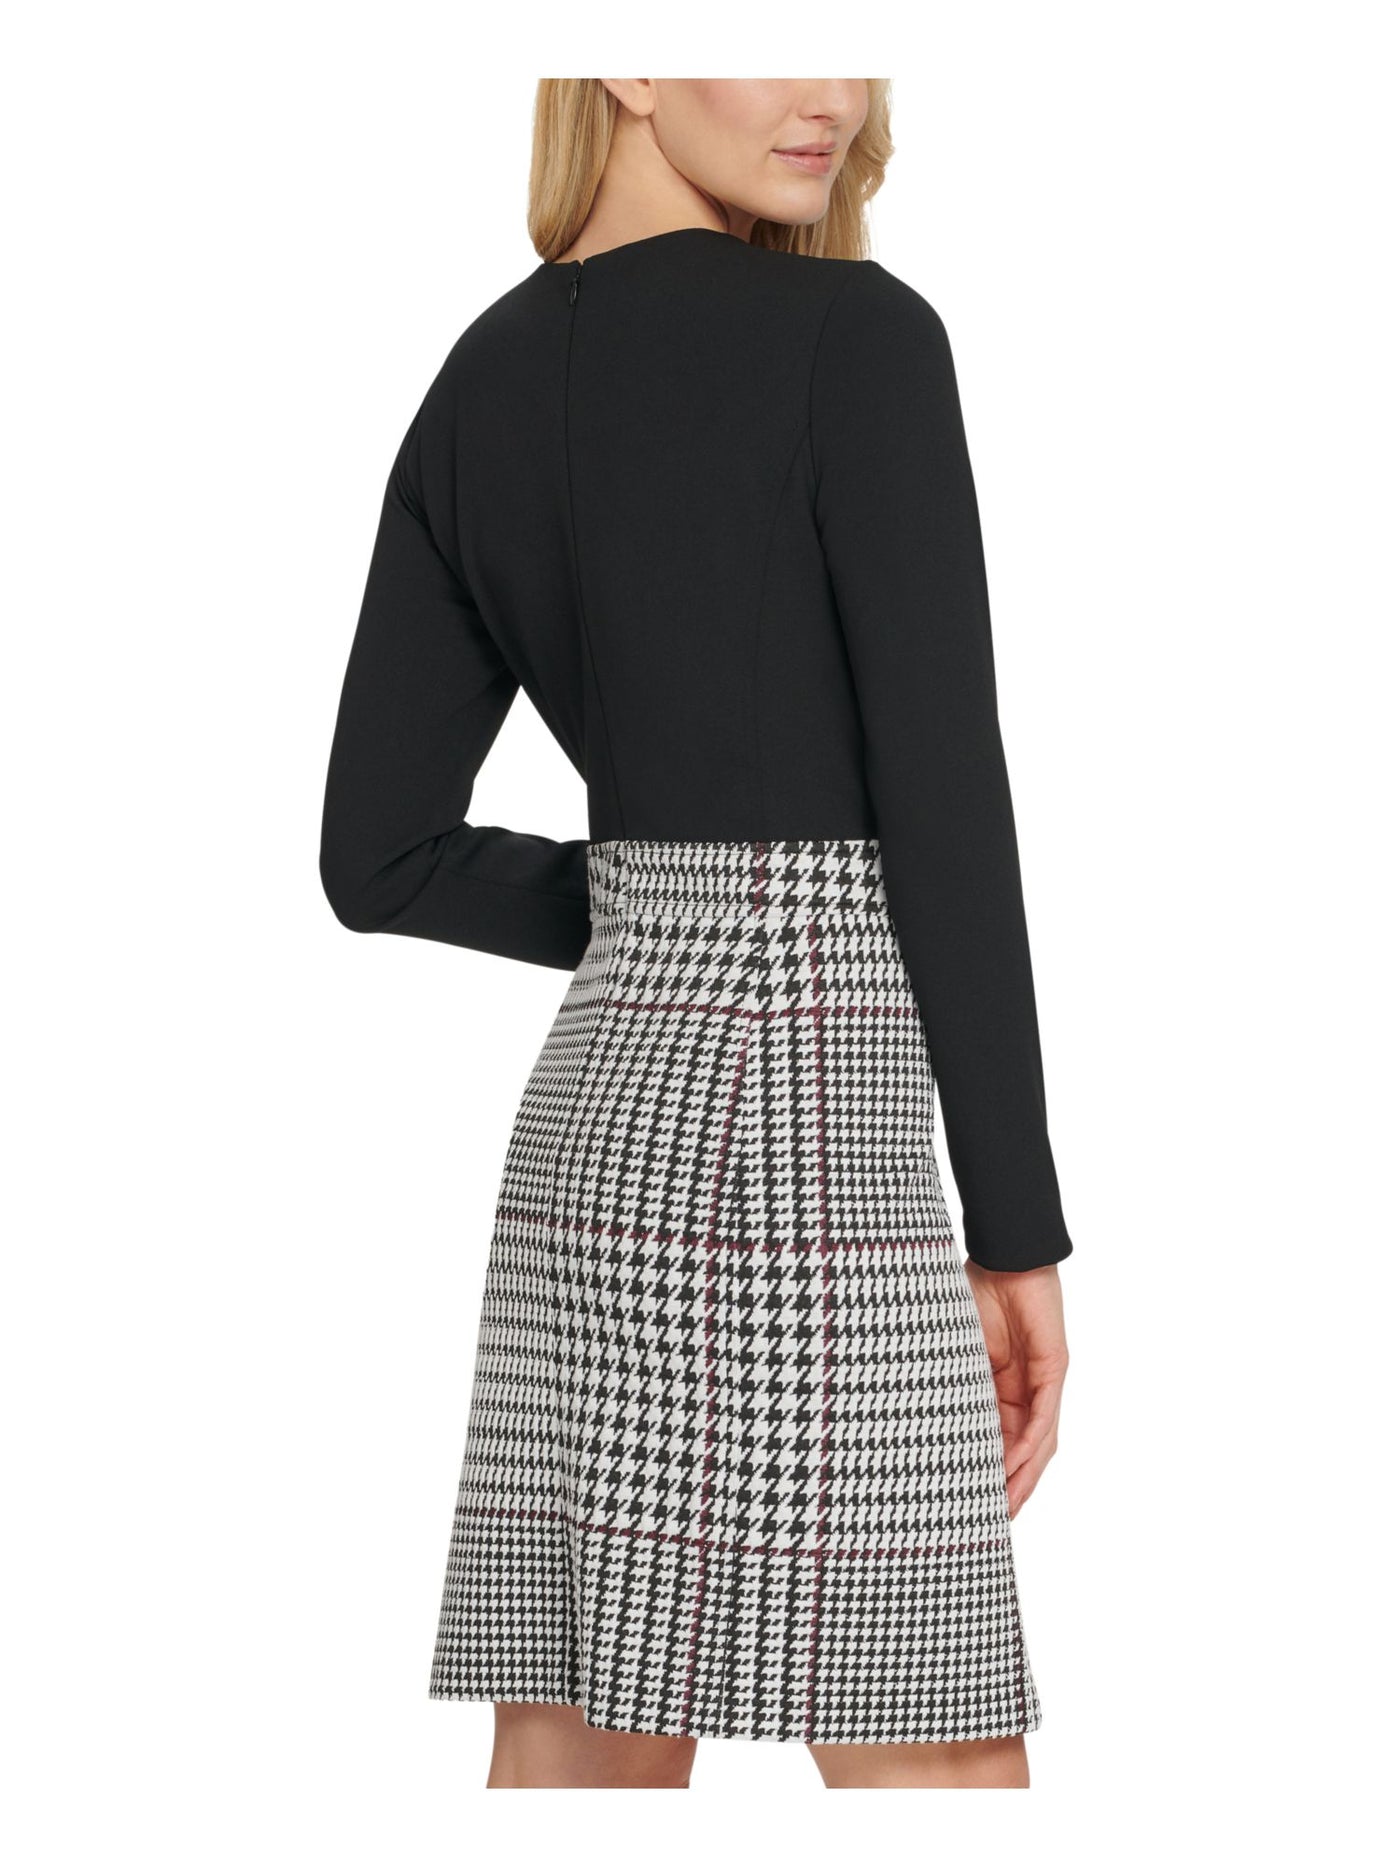 DKNY Womens Black Stretch Zippered Houndstooth Long Sleeve Round Neck Above The Knee Wear To Work Sheath Dress 16